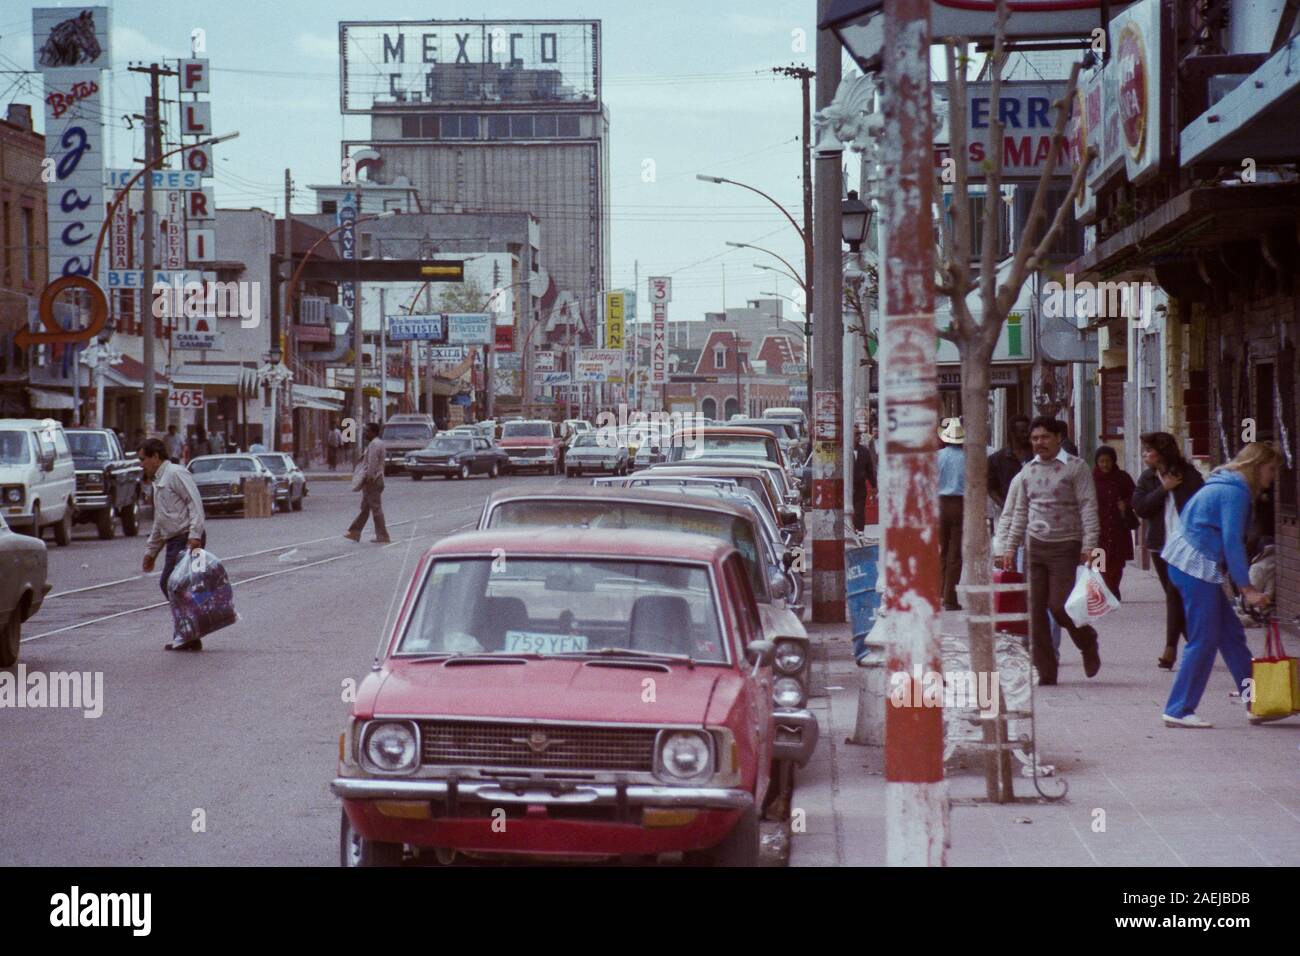 Juarez, Chihuahua, Mexico - February, 1986: Archival view of buildings, stores, traffic and ...